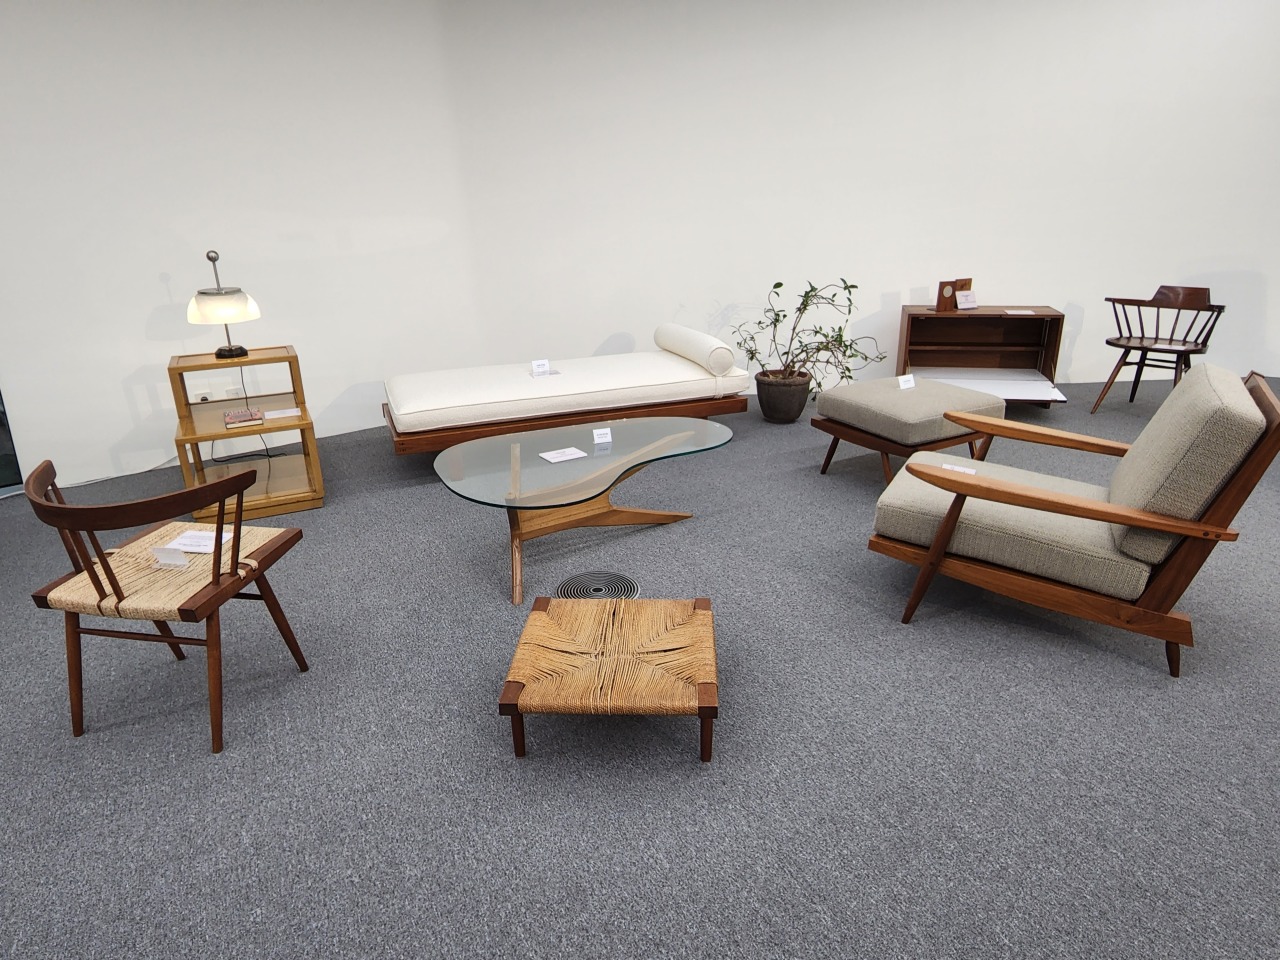 Grass-seated chair and ottoman (foreground, left) by George Nakashima (Hwang Dong-hee/The Korea Herald)